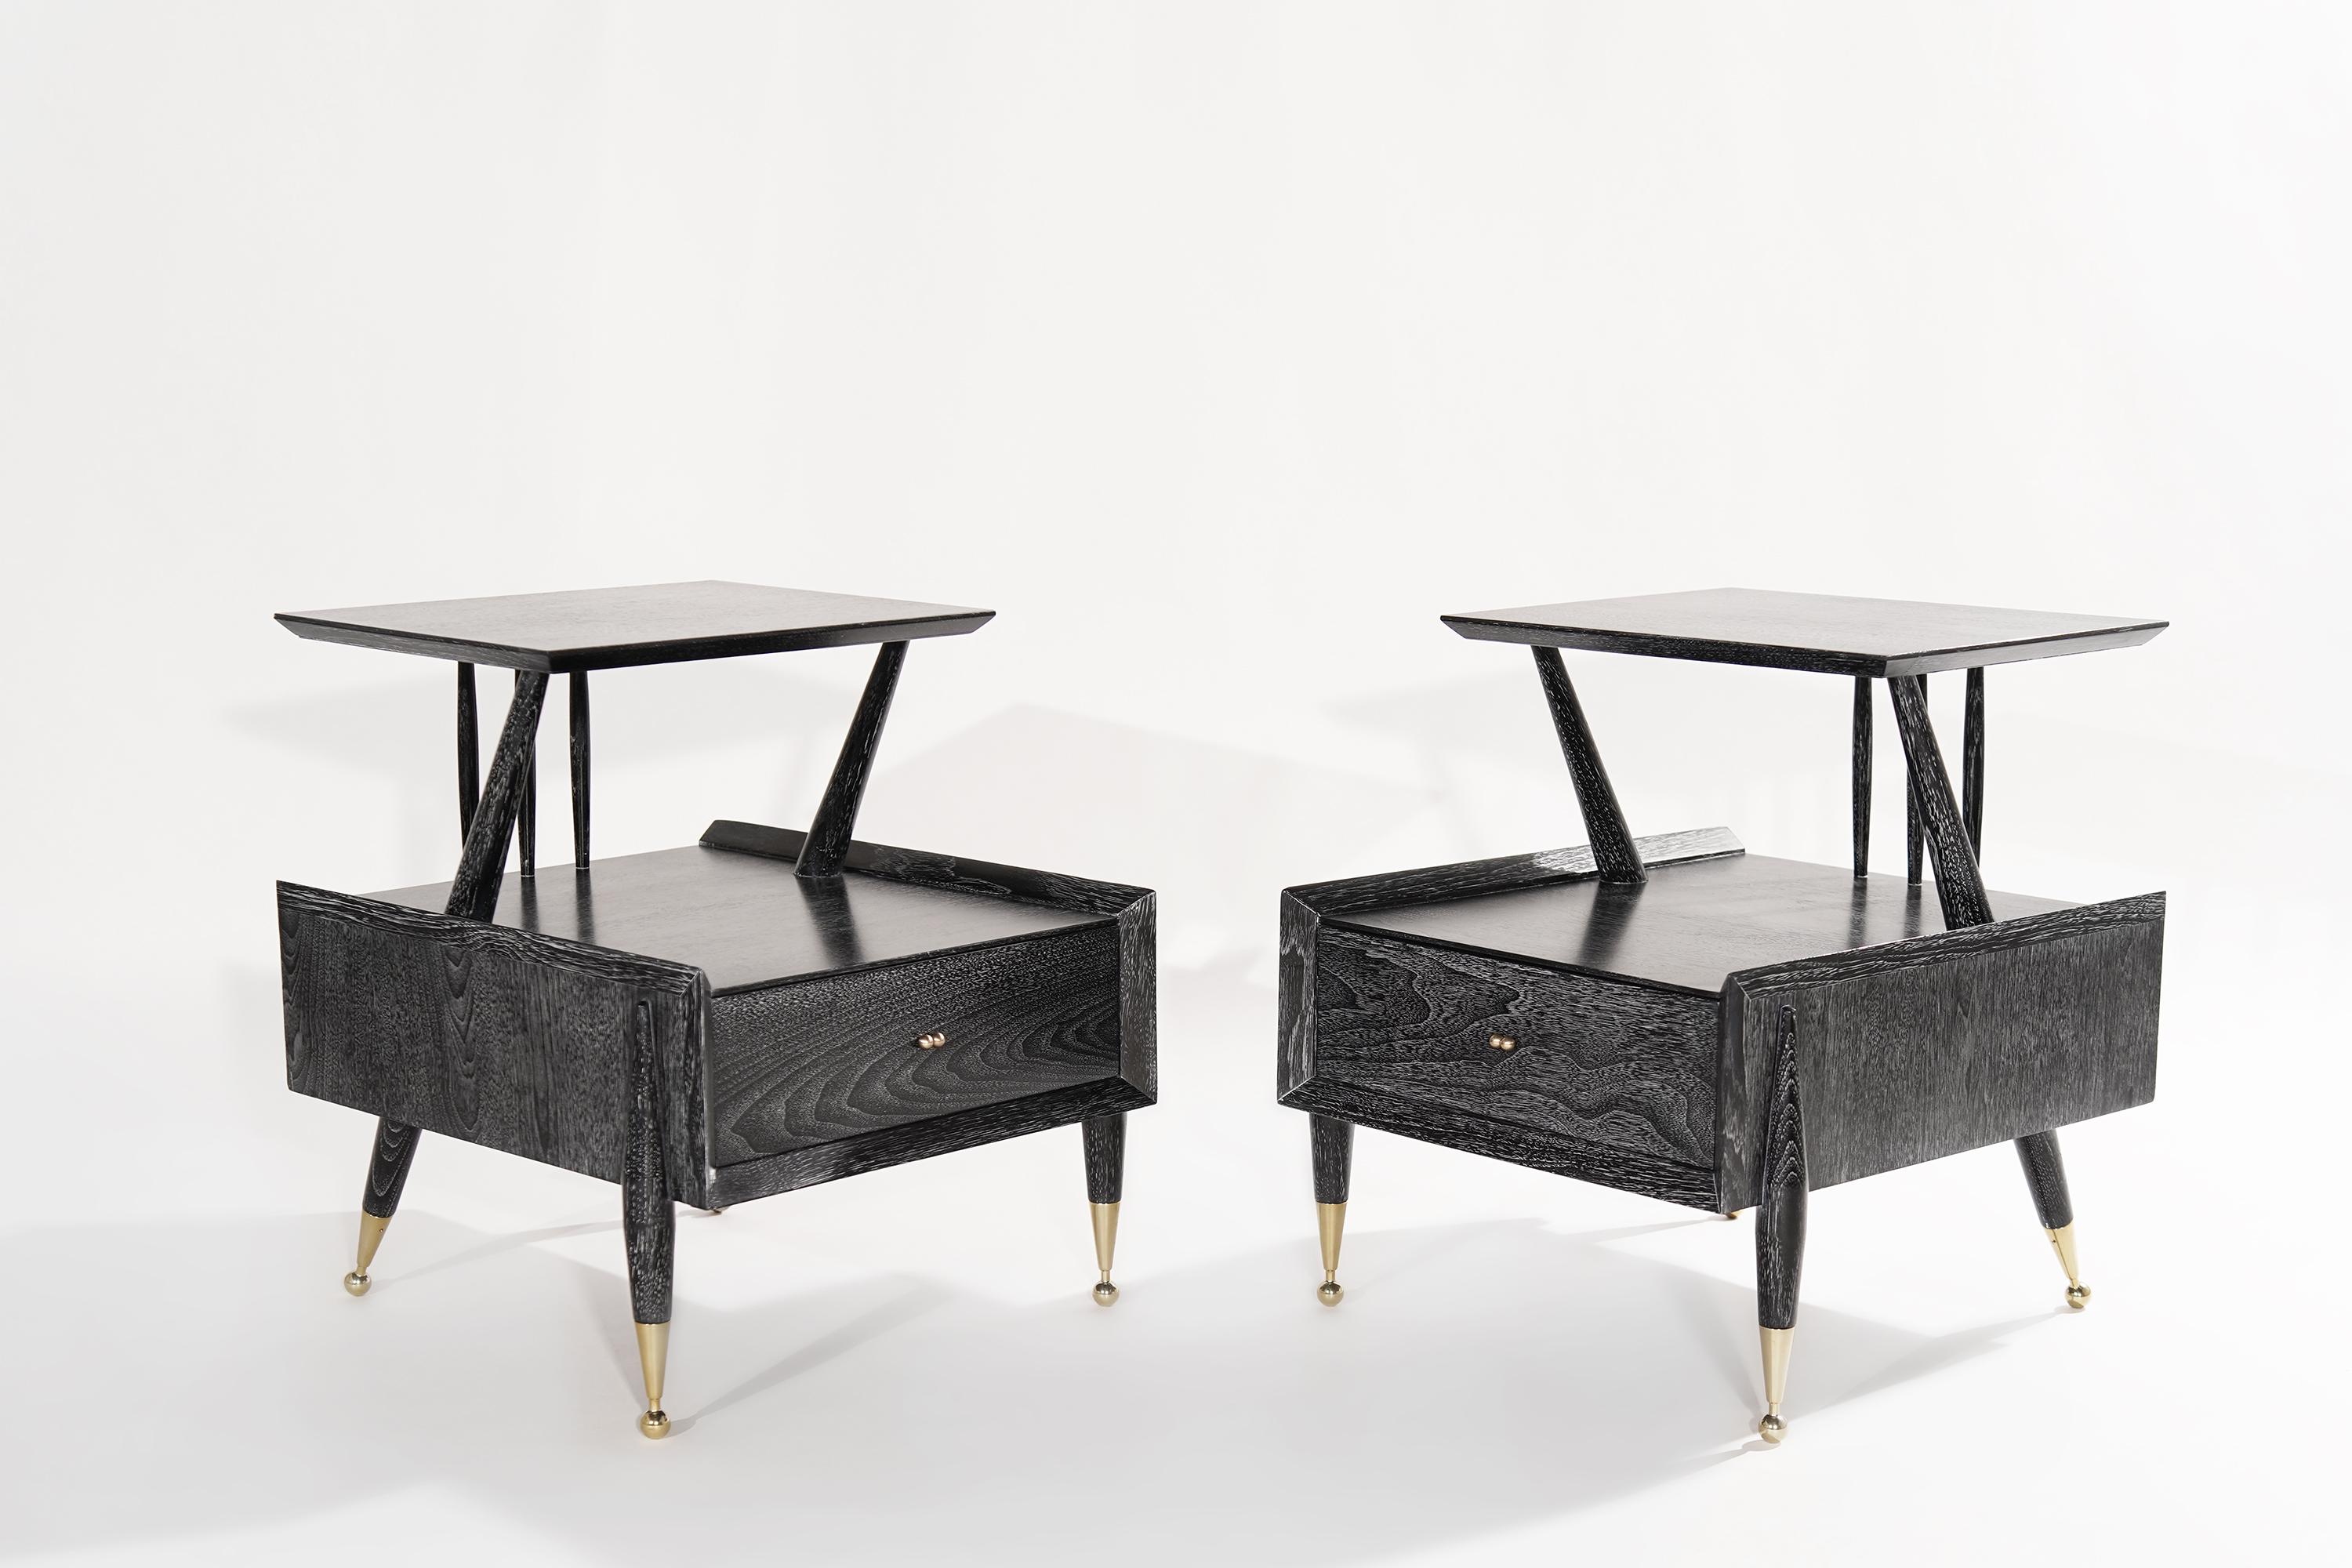 Pair of organic end tables or nightstands designed by Kent Coffey, fully restored and perfectly executed in limed walnut, brass hardware, and sabots have been hand-polished but do retain some patina. 

Other designers working in the organic style